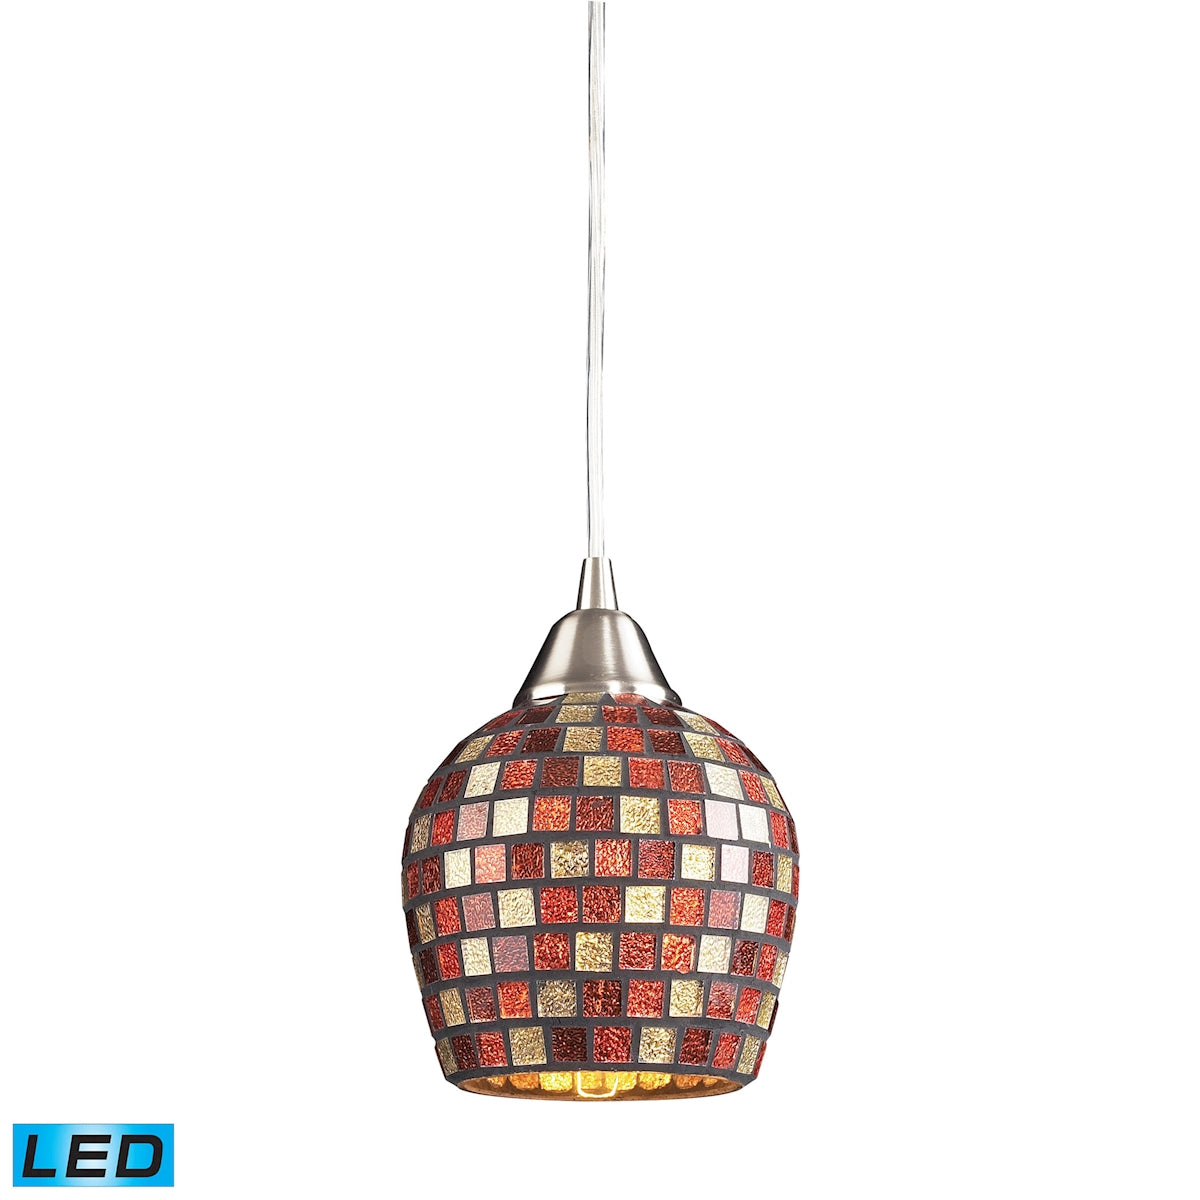 ELK Lighting 528-1MLT-LED Fusion 1-Light Mini Pendant in Satin Nickel with Multi-colored Mosaic Glass - Includes LED Bulb